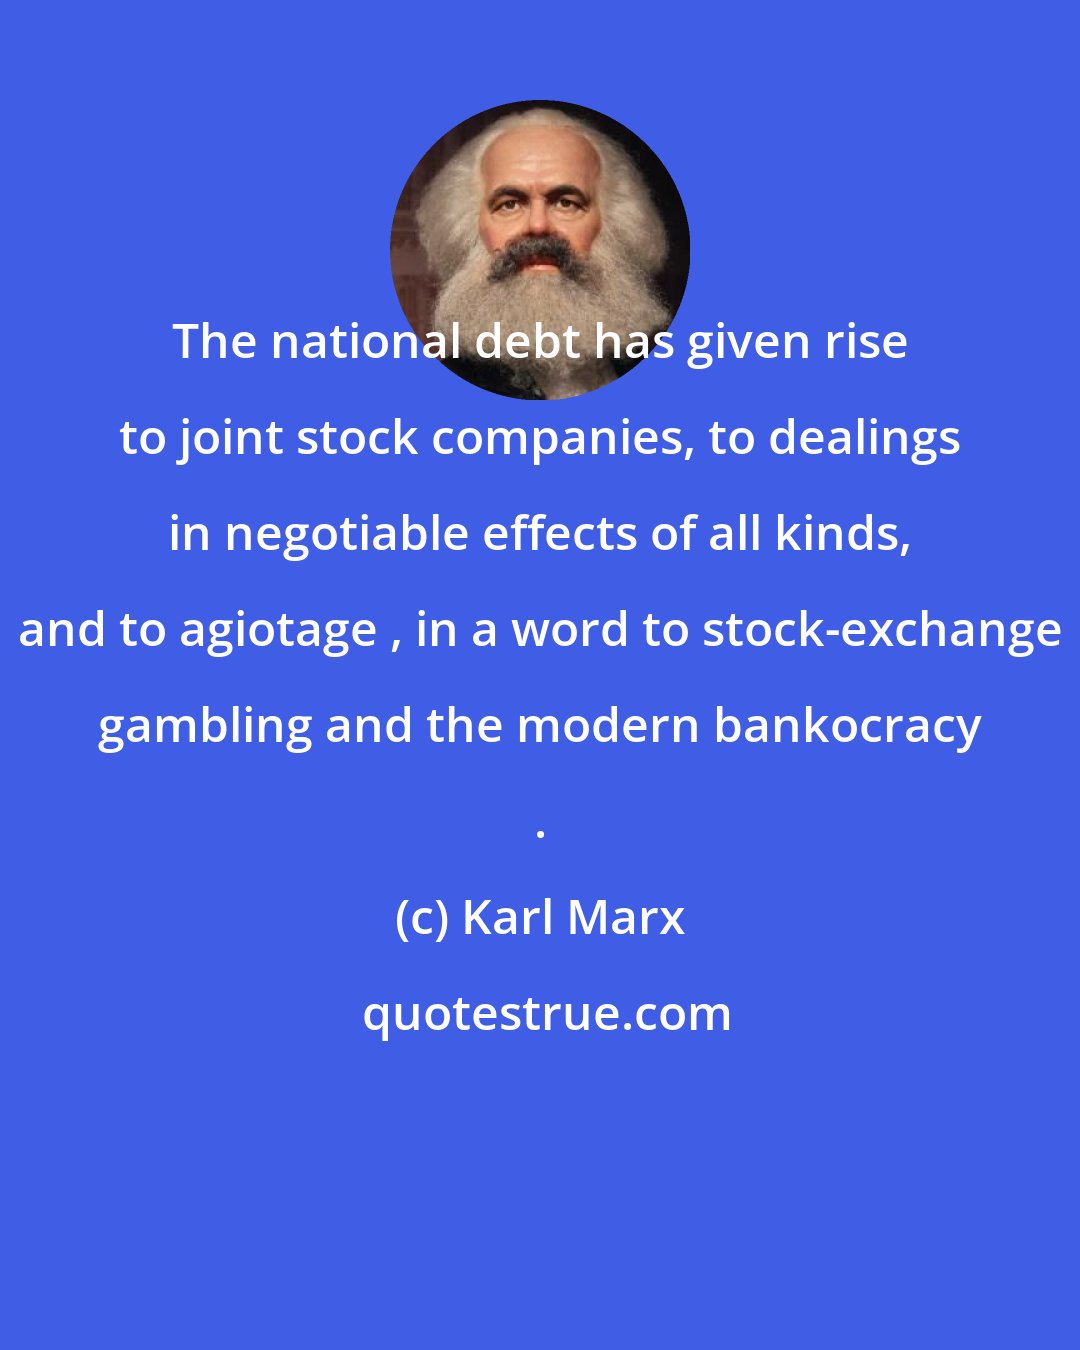 Karl Marx: The national debt has given rise to joint stock companies, to dealings in negotiable effects of all kinds, and to agiotage , in a word to stock-exchange gambling and the modern bankocracy .